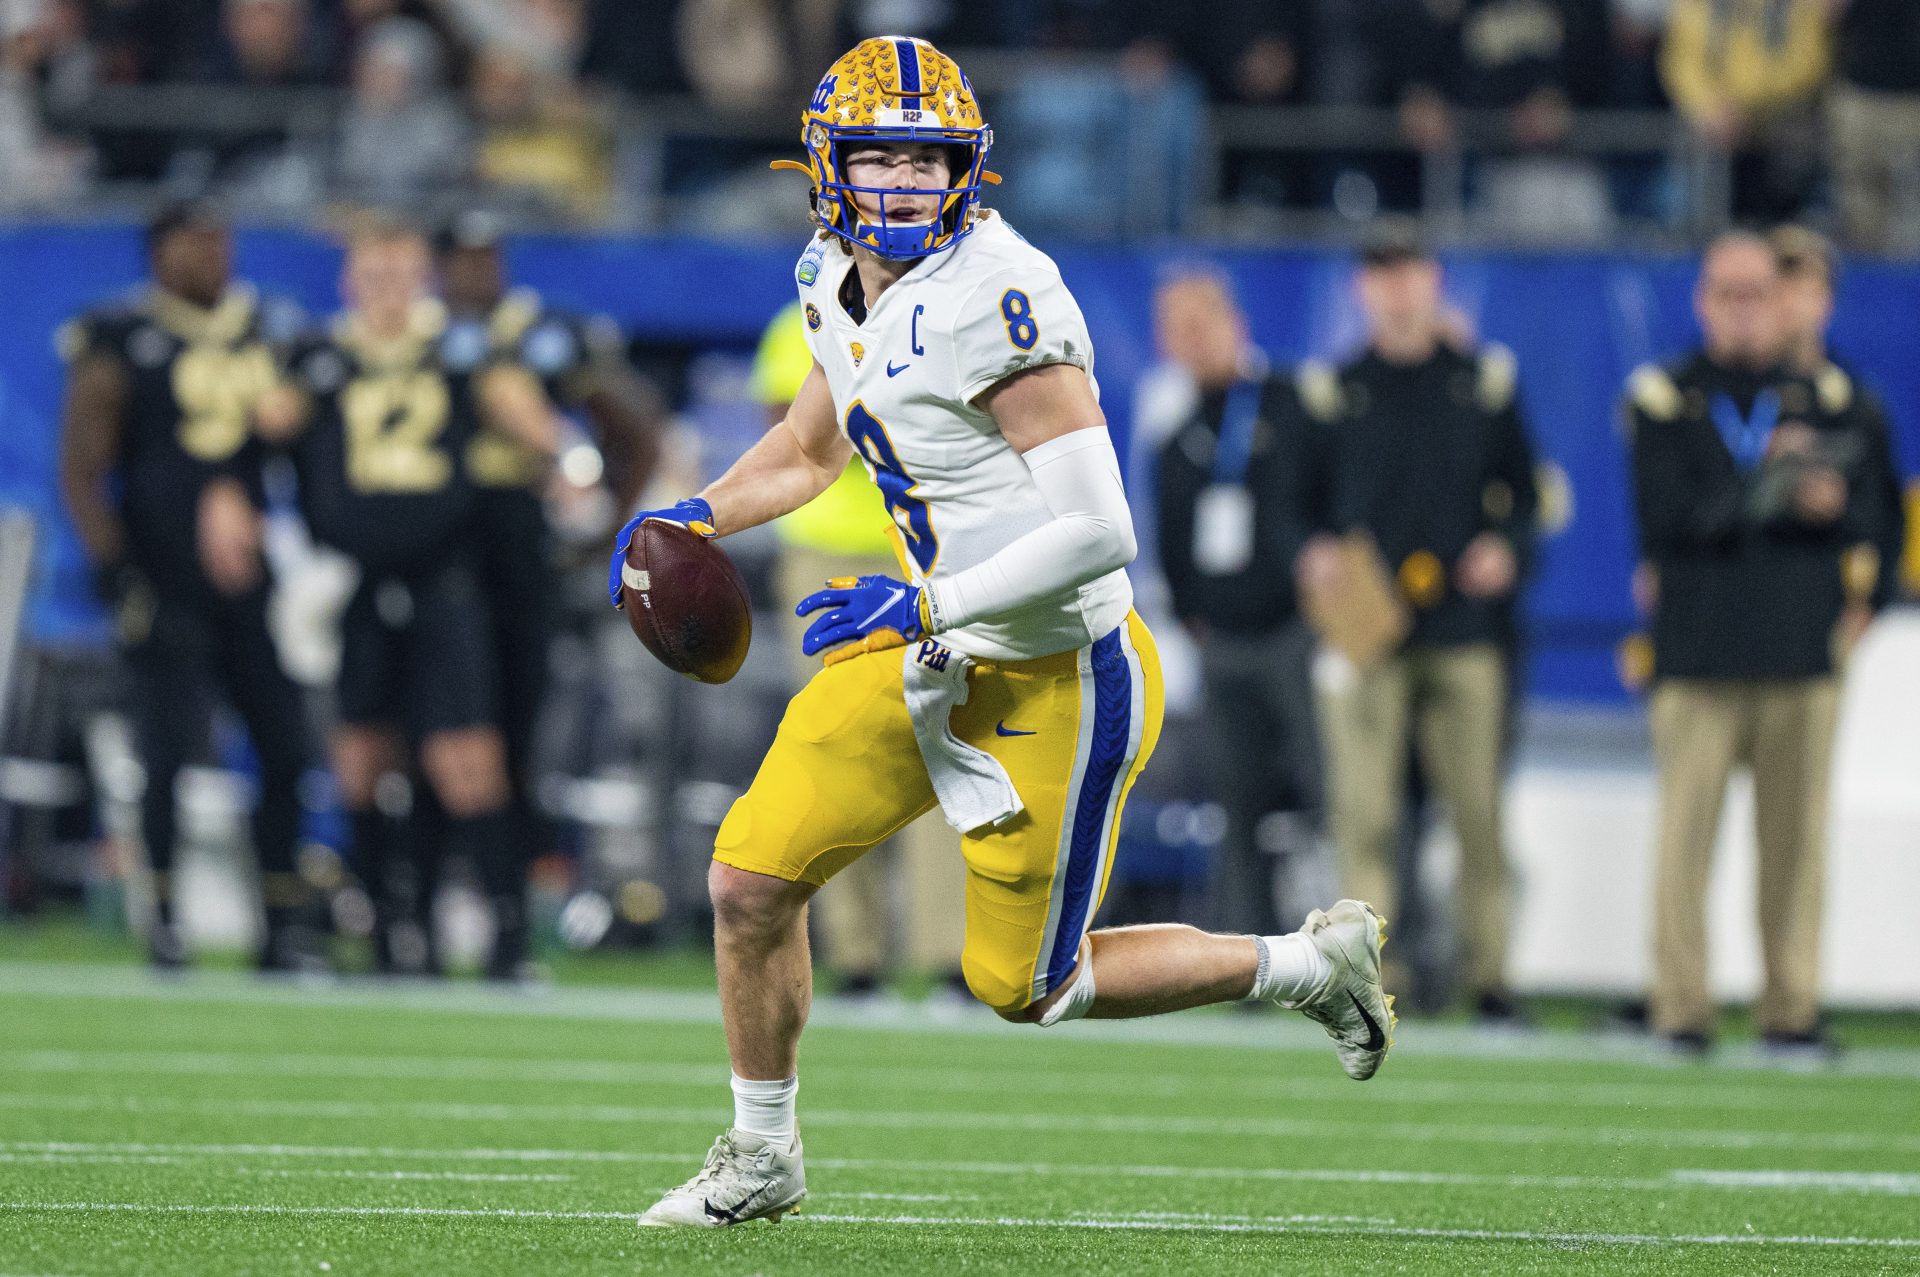 Pittsburgh Panthers quarterback Kenny Pickett (8) plays against the Wake Forest Demon Deacons during the Atlantic Coast Conference championship NCAA college football game Saturday, Dec. 4, 2021, in Charlotte, N.C.